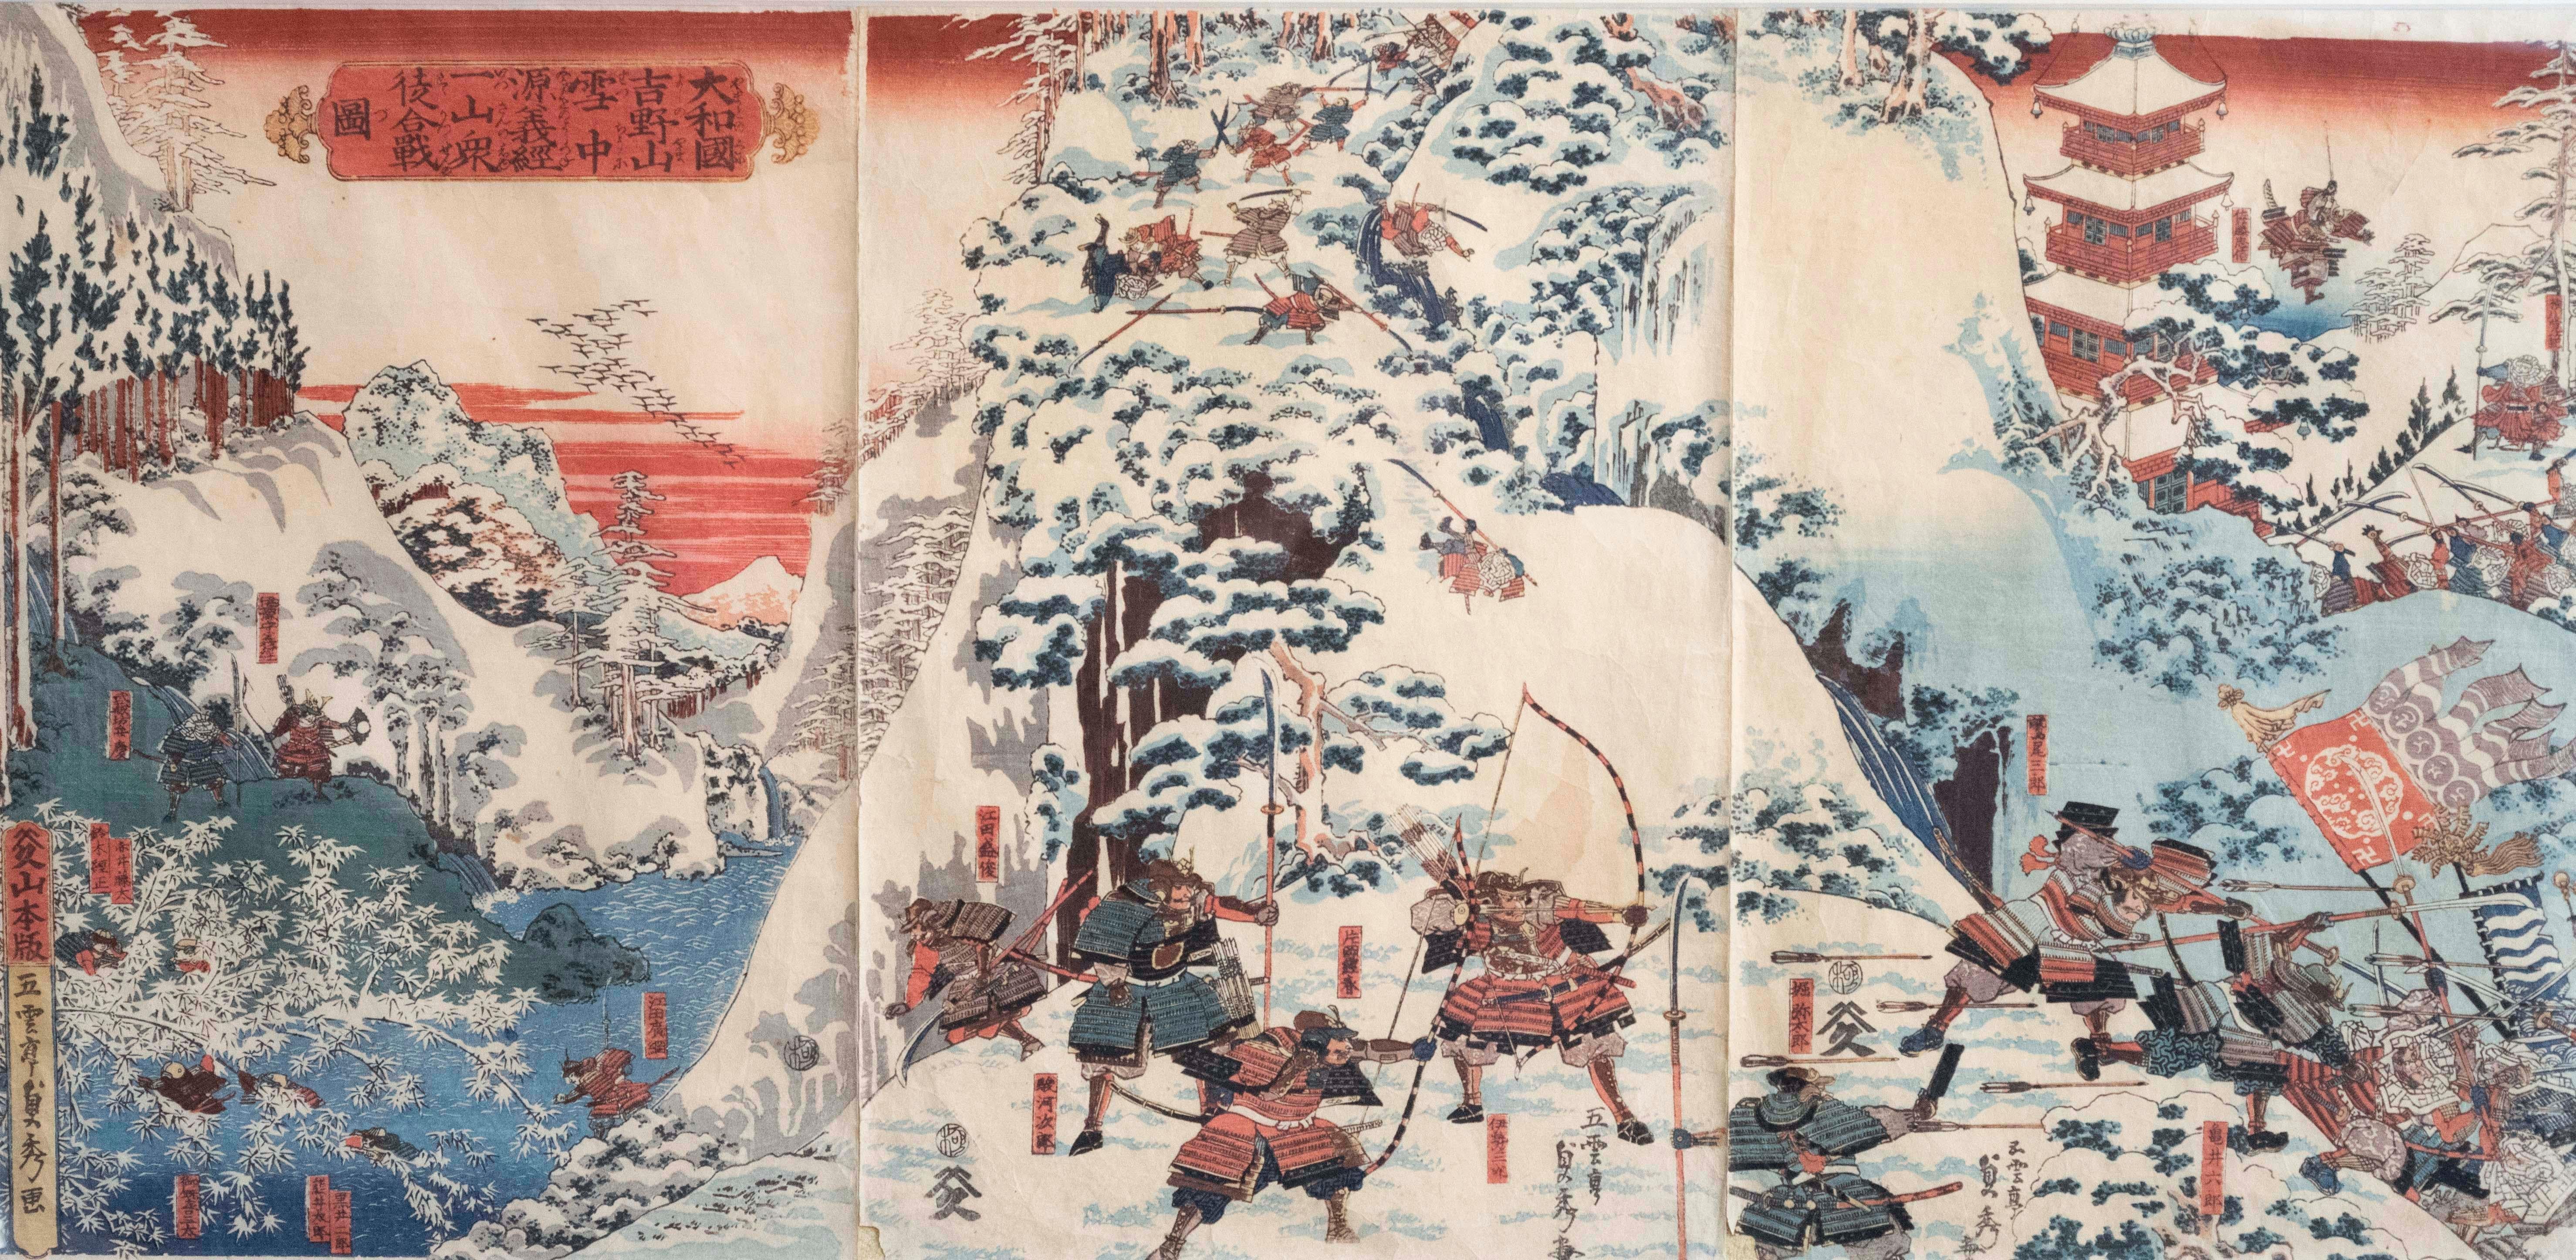 Wonderful  battle scene in the snowy mountains of Yoshino in Yamato Province by Sadahide Utagawa circa 1860s. Each print measures 14.5"H x 10"W.  Framed 35"L x 20"H. 

Sadahide Utagawa was born in 1807 in the Fusa province of Japan.  He was a pupil